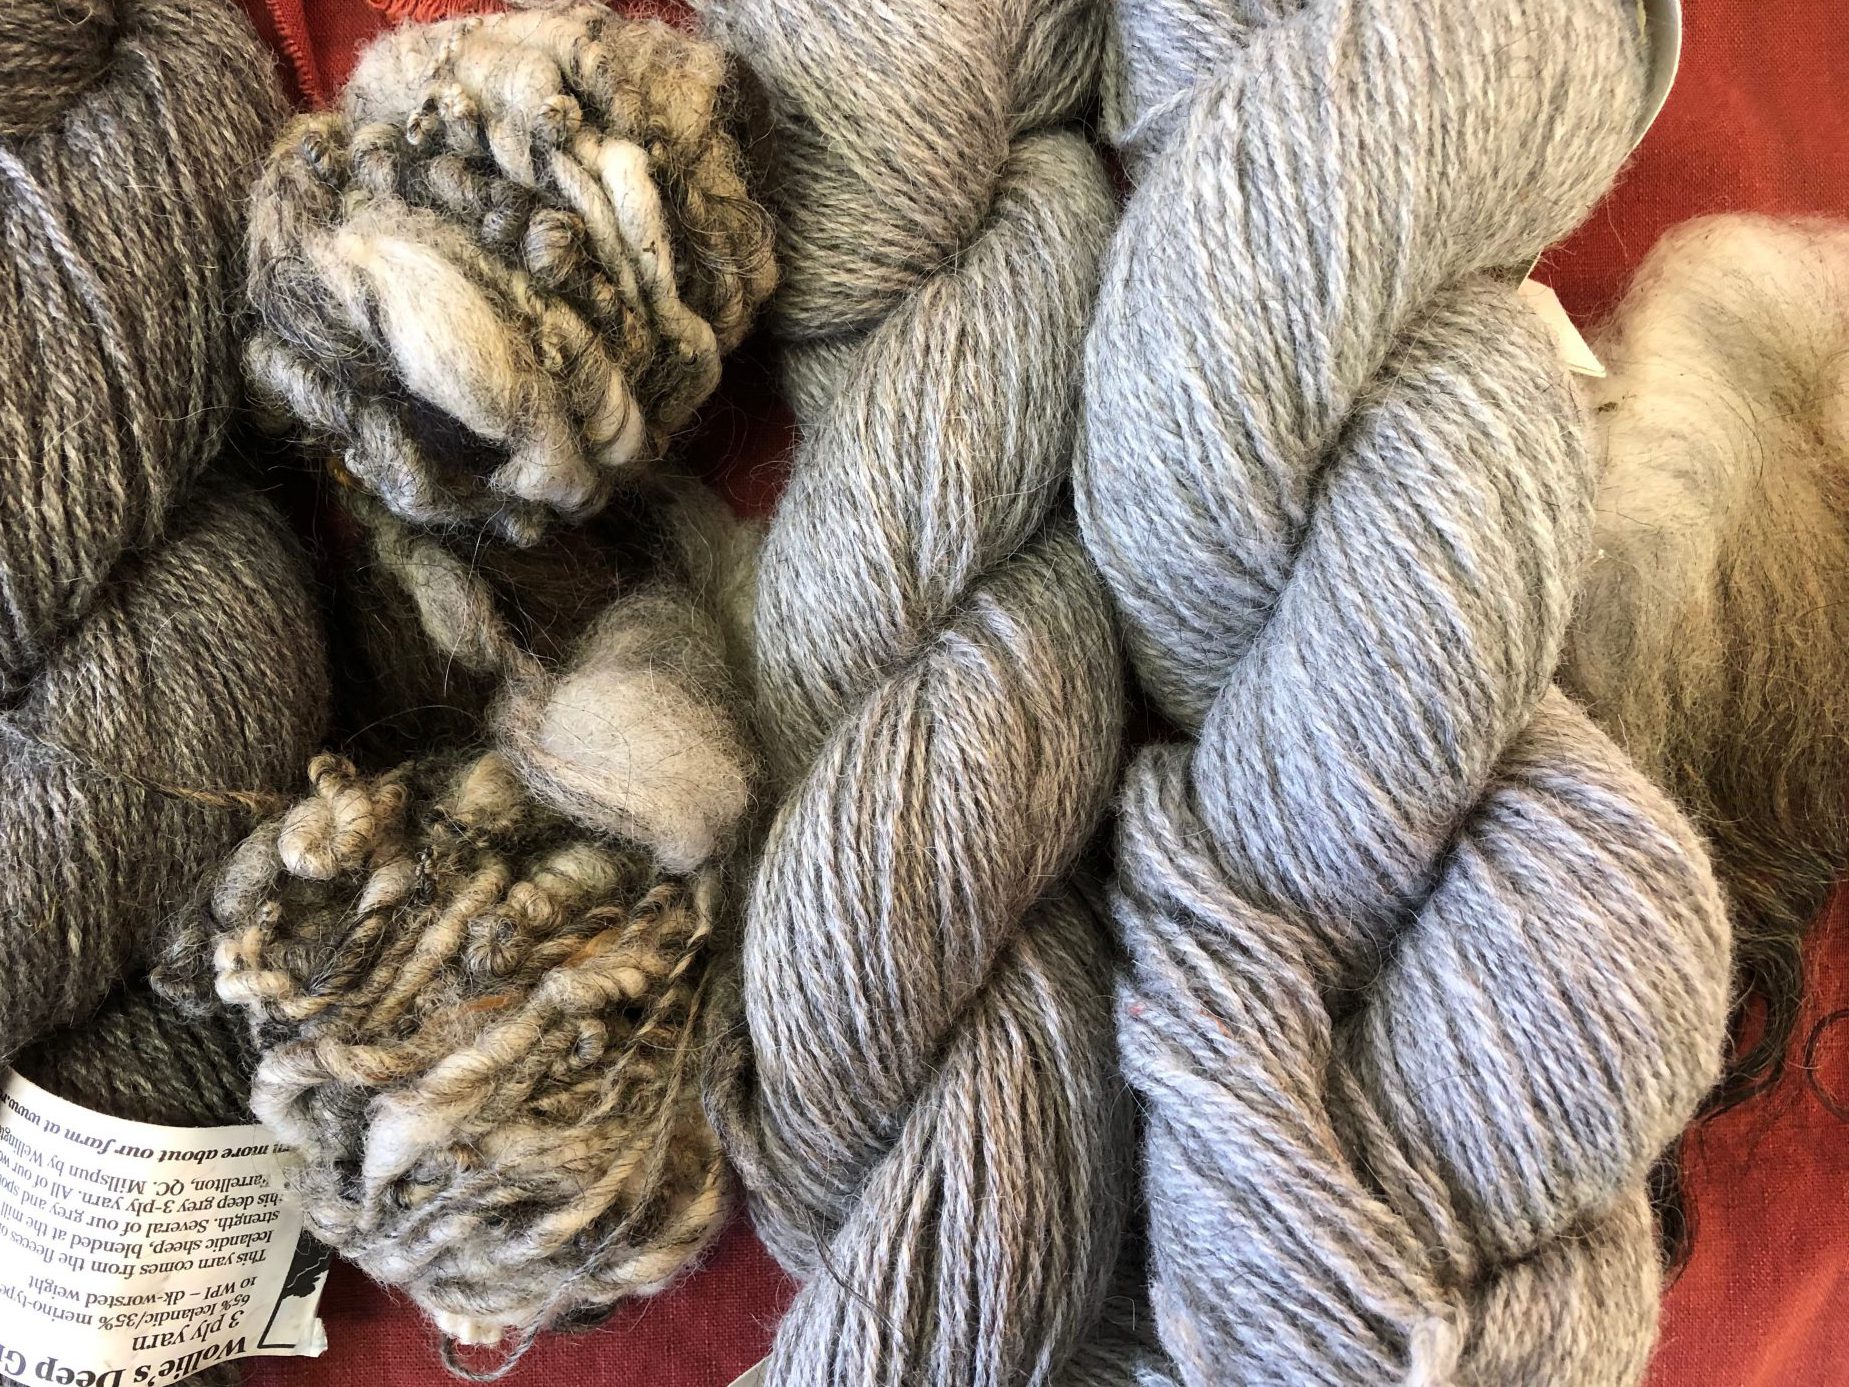 A collection of wool in natural colours, in skeins and hand spun balls, and a bit of unspun fleece